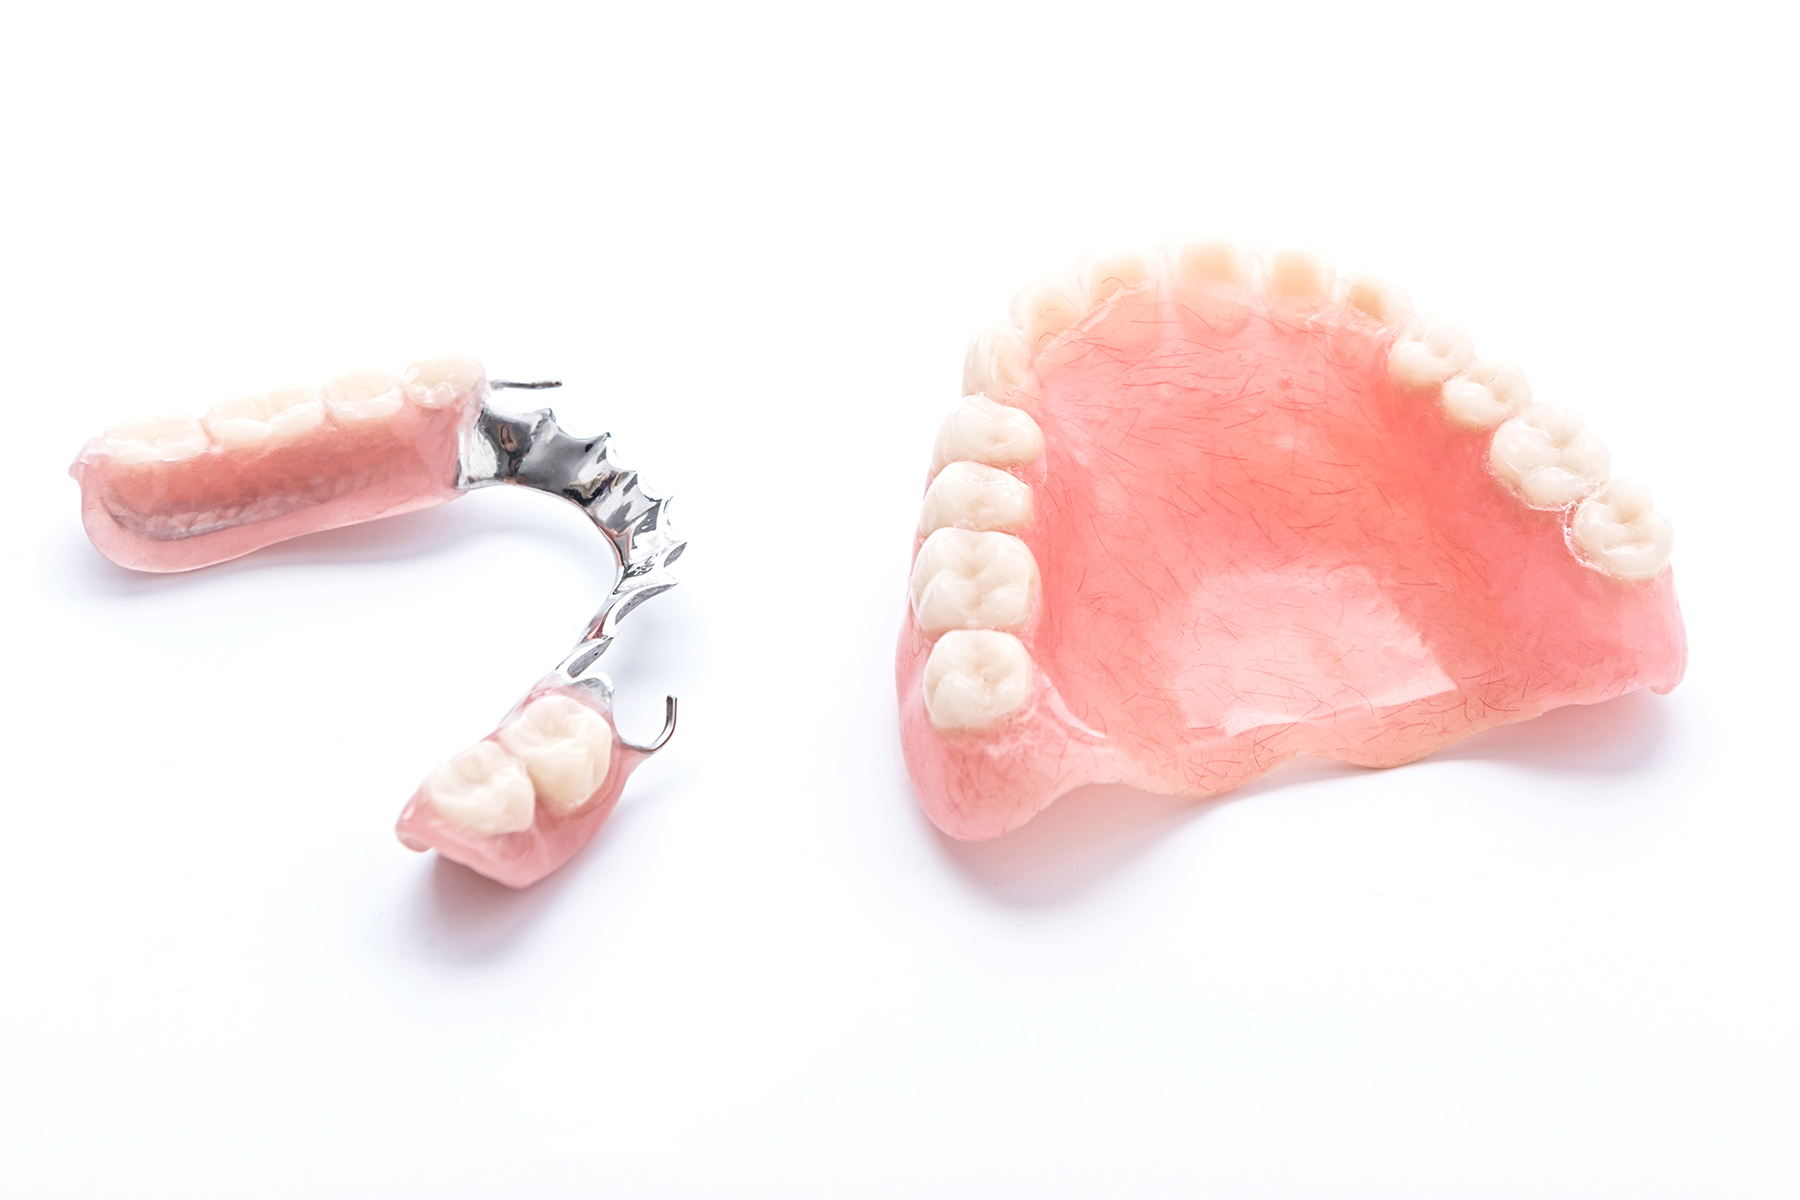 Prosthetics of Patients with partial loss of Teeth with Removable Dentures